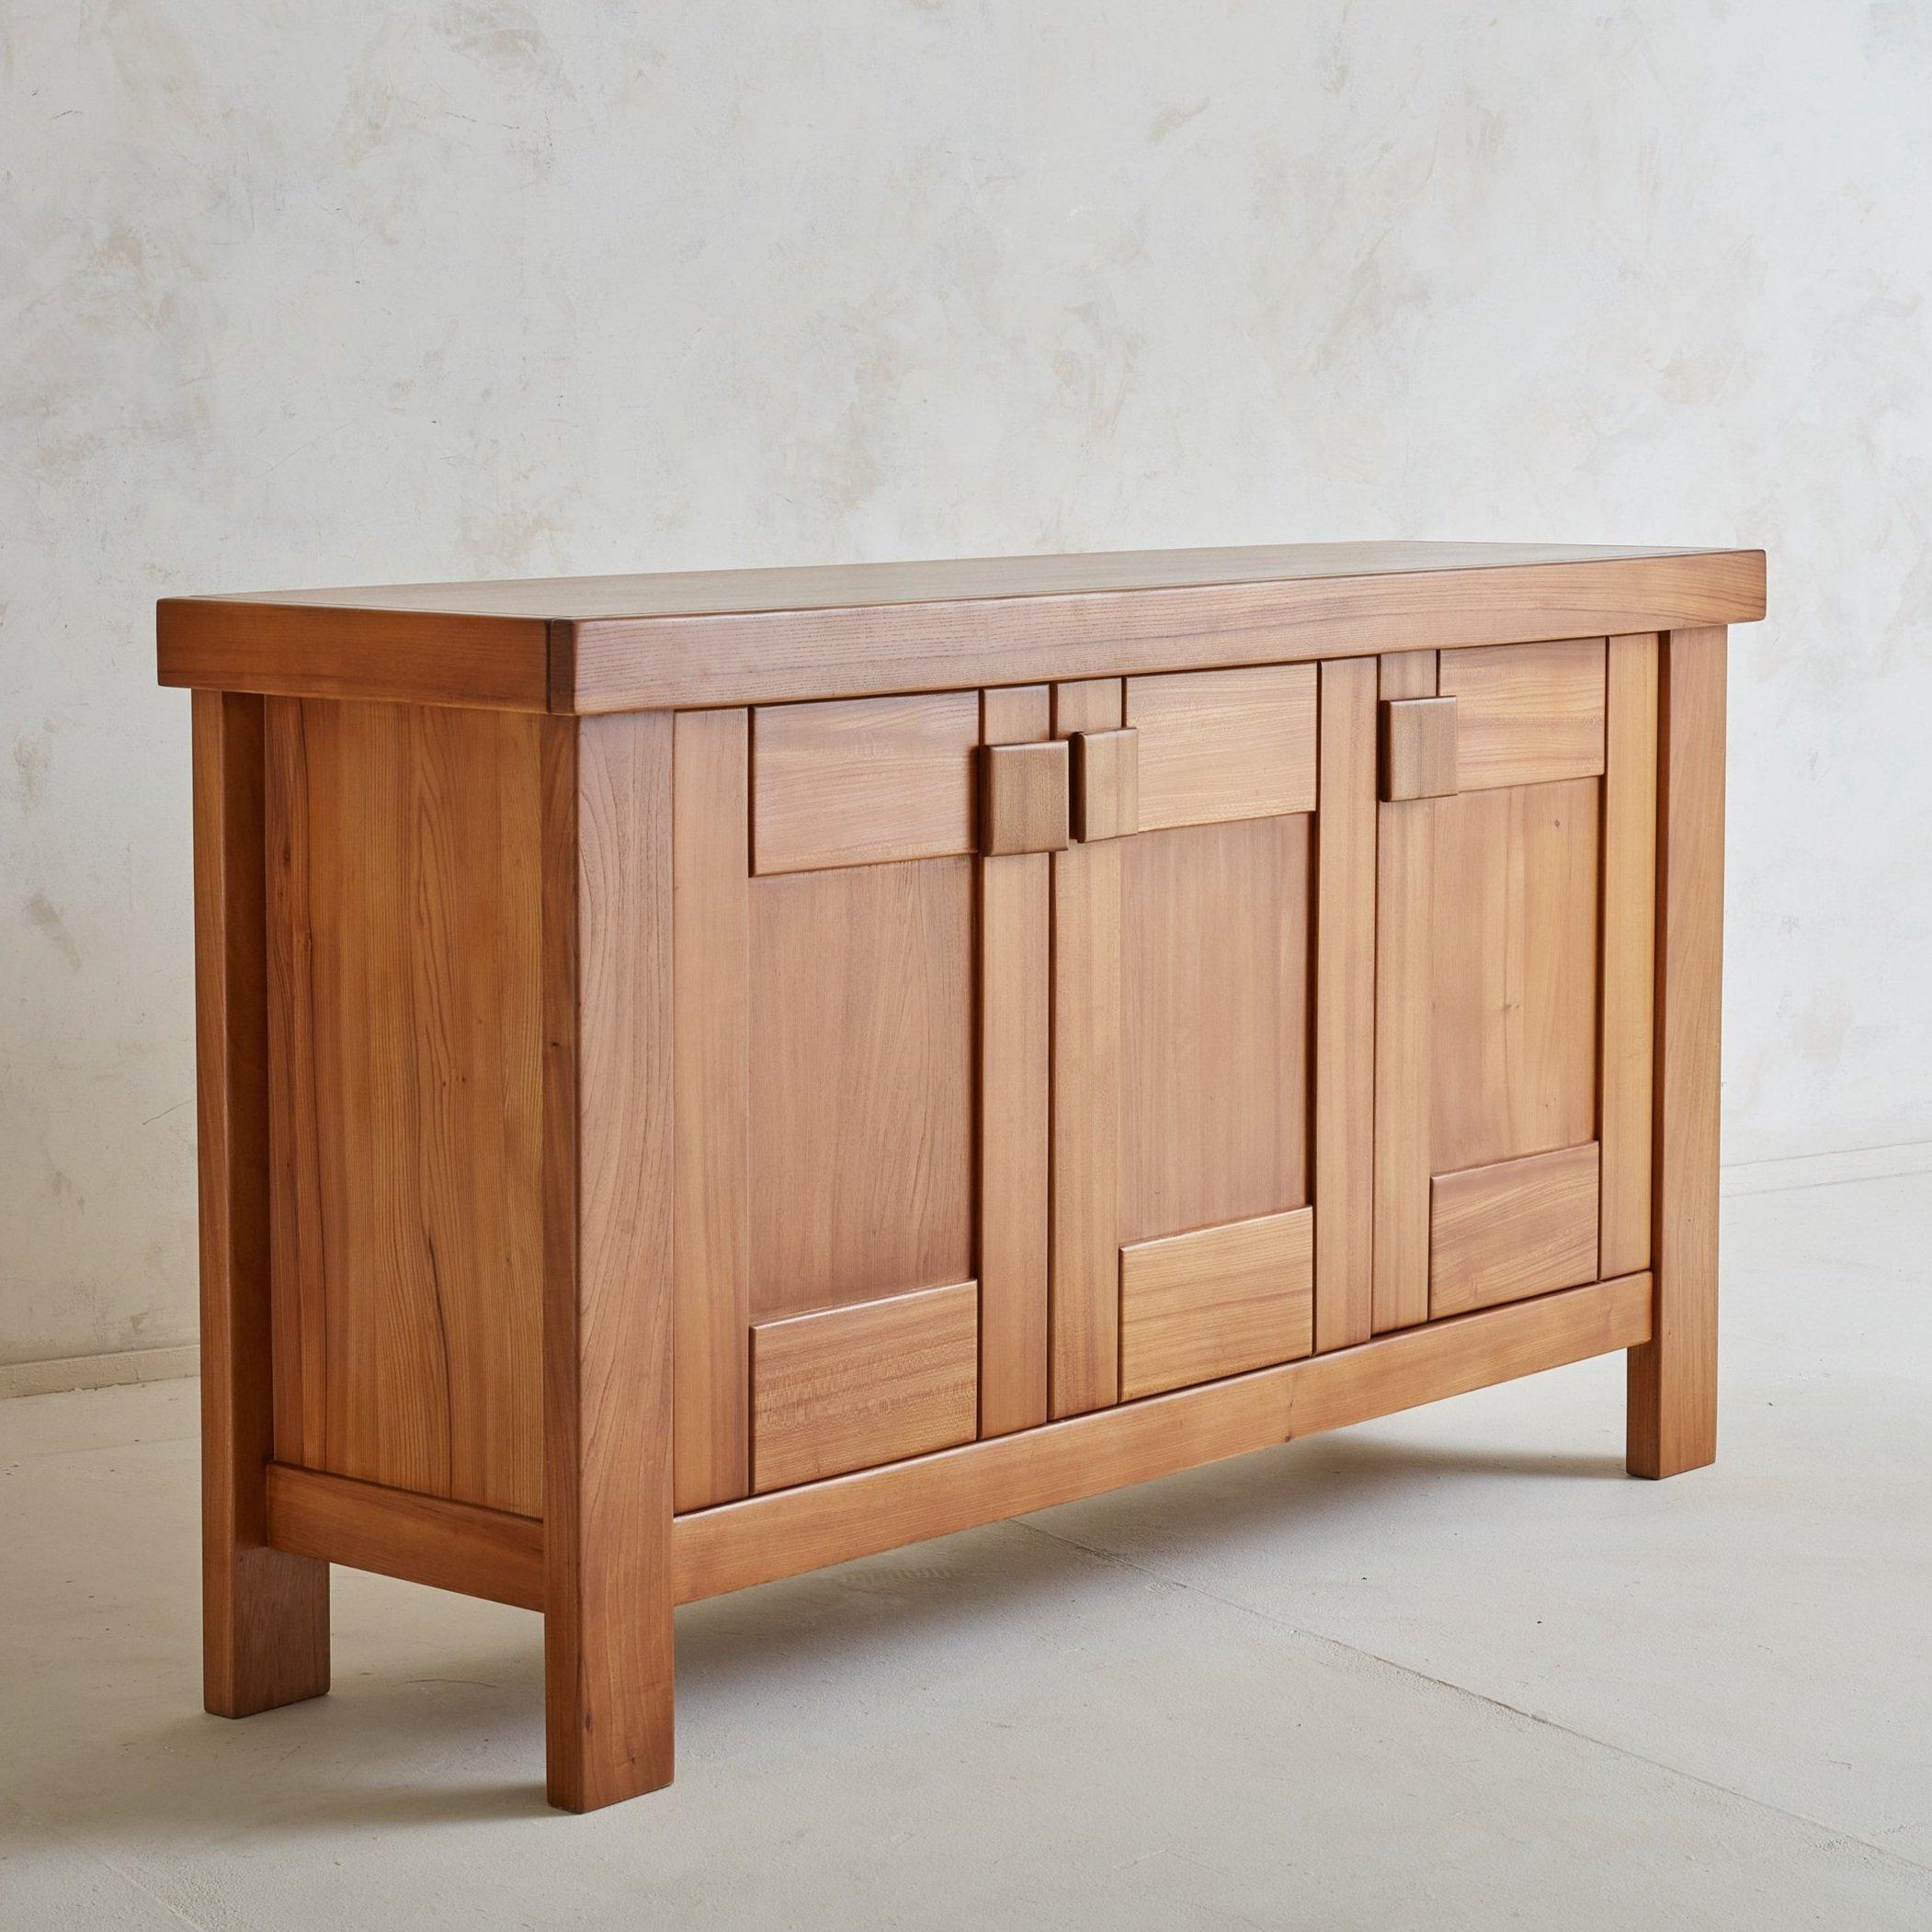 A 1970s French sideboard attributed to Maison Regain. This piece features beautiful craftsmanship; it was constructed with subtly grained elm wood that highlights the sleek lines throughout. Three doors with block pulls open to reveal a center shelf